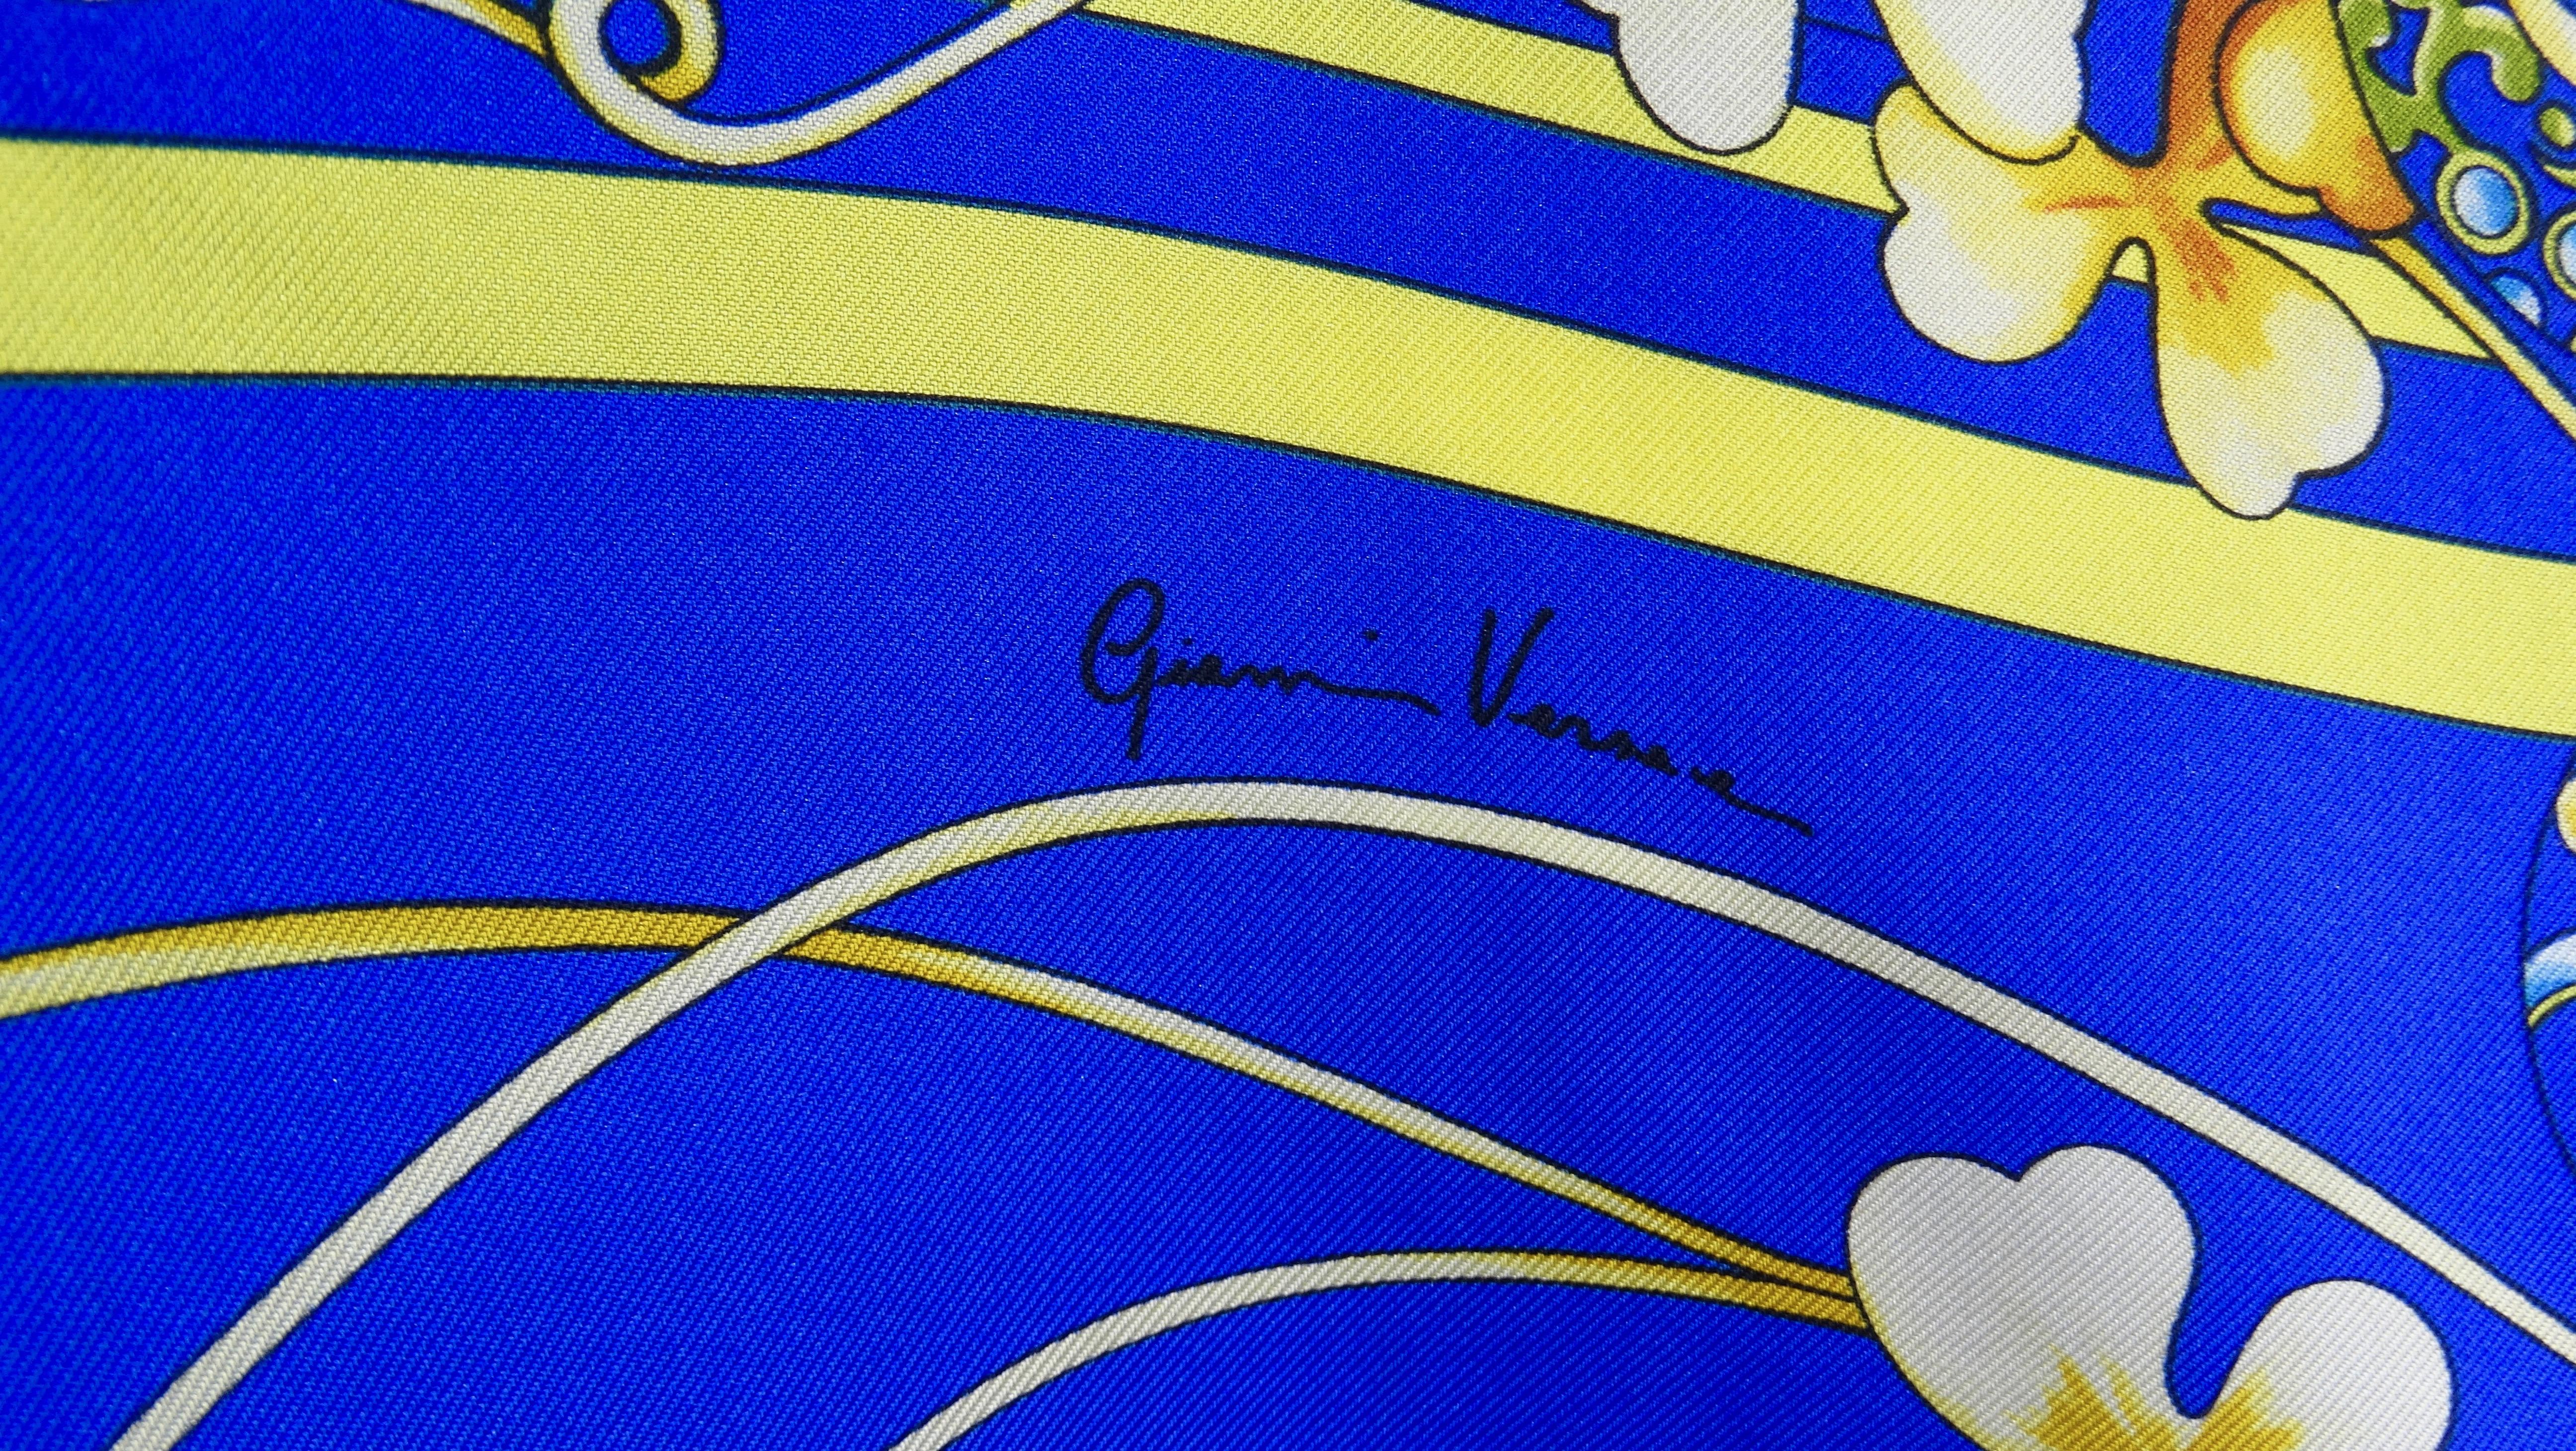 Gianni Versace 1990s Japanese Inspired Silk Shirt  For Sale 1